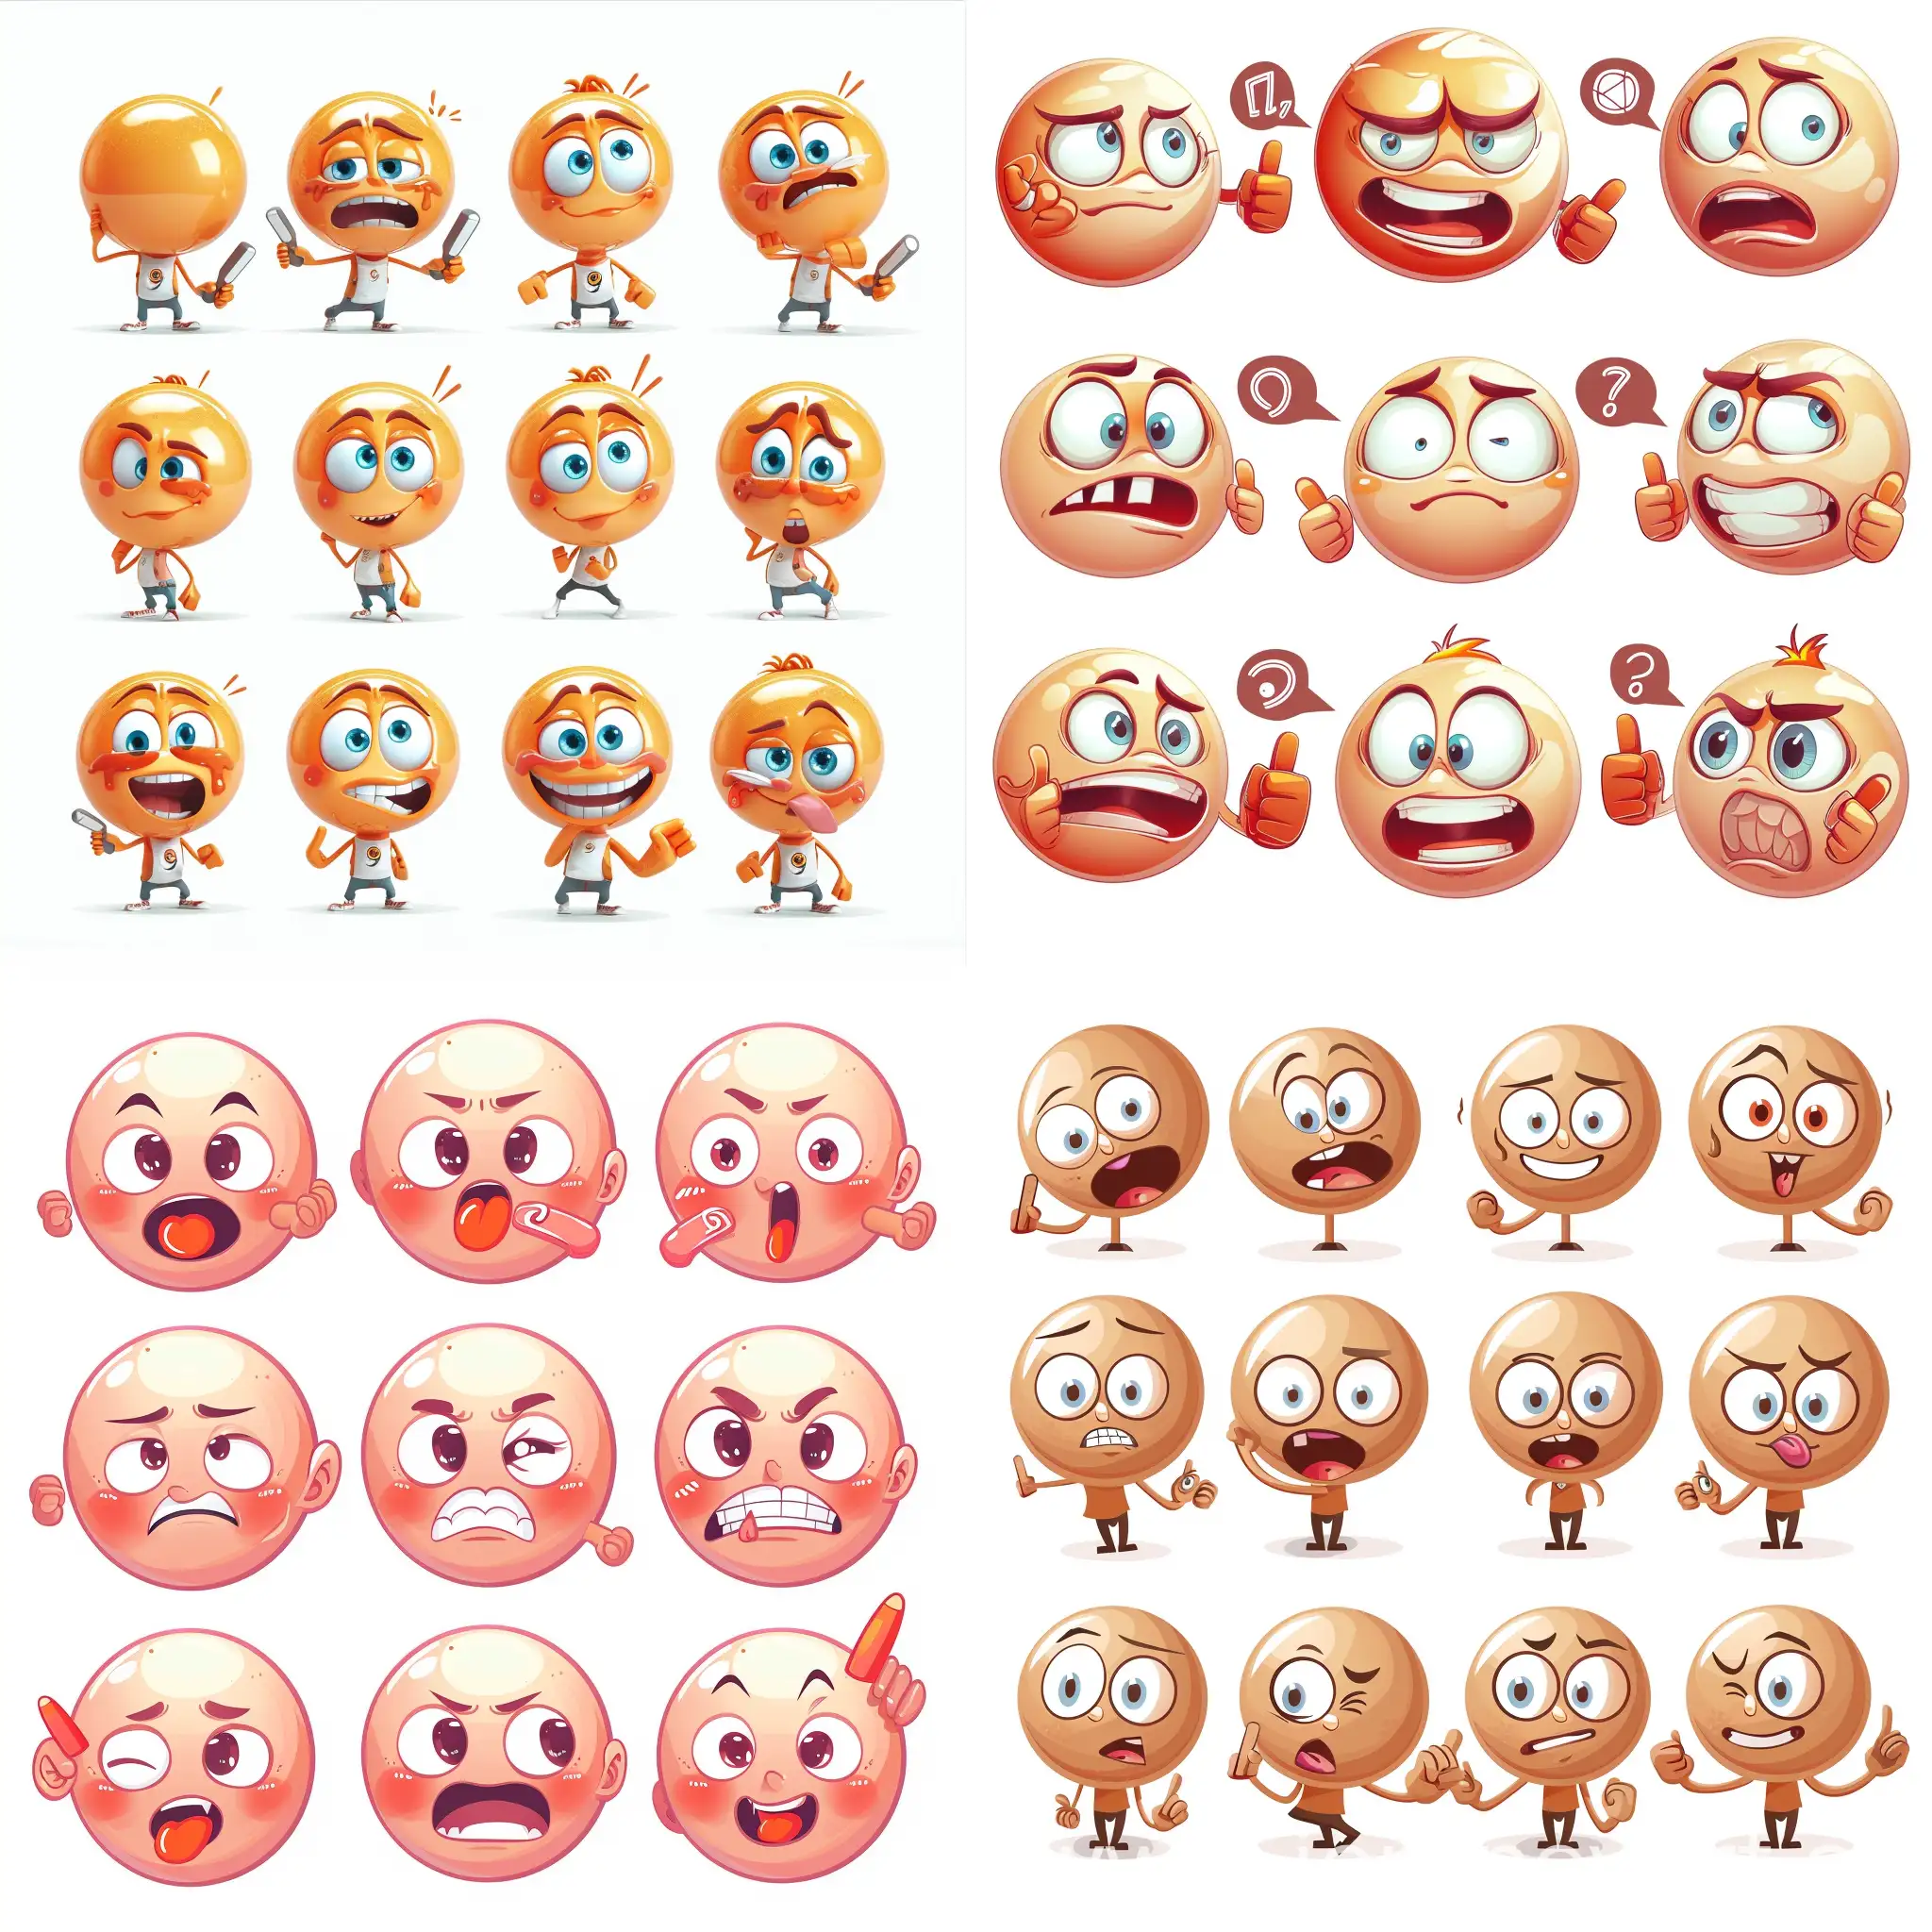 Adorable-PixarStyle-Mouse-Pointer-Stickers-with-Expressive-Emojis